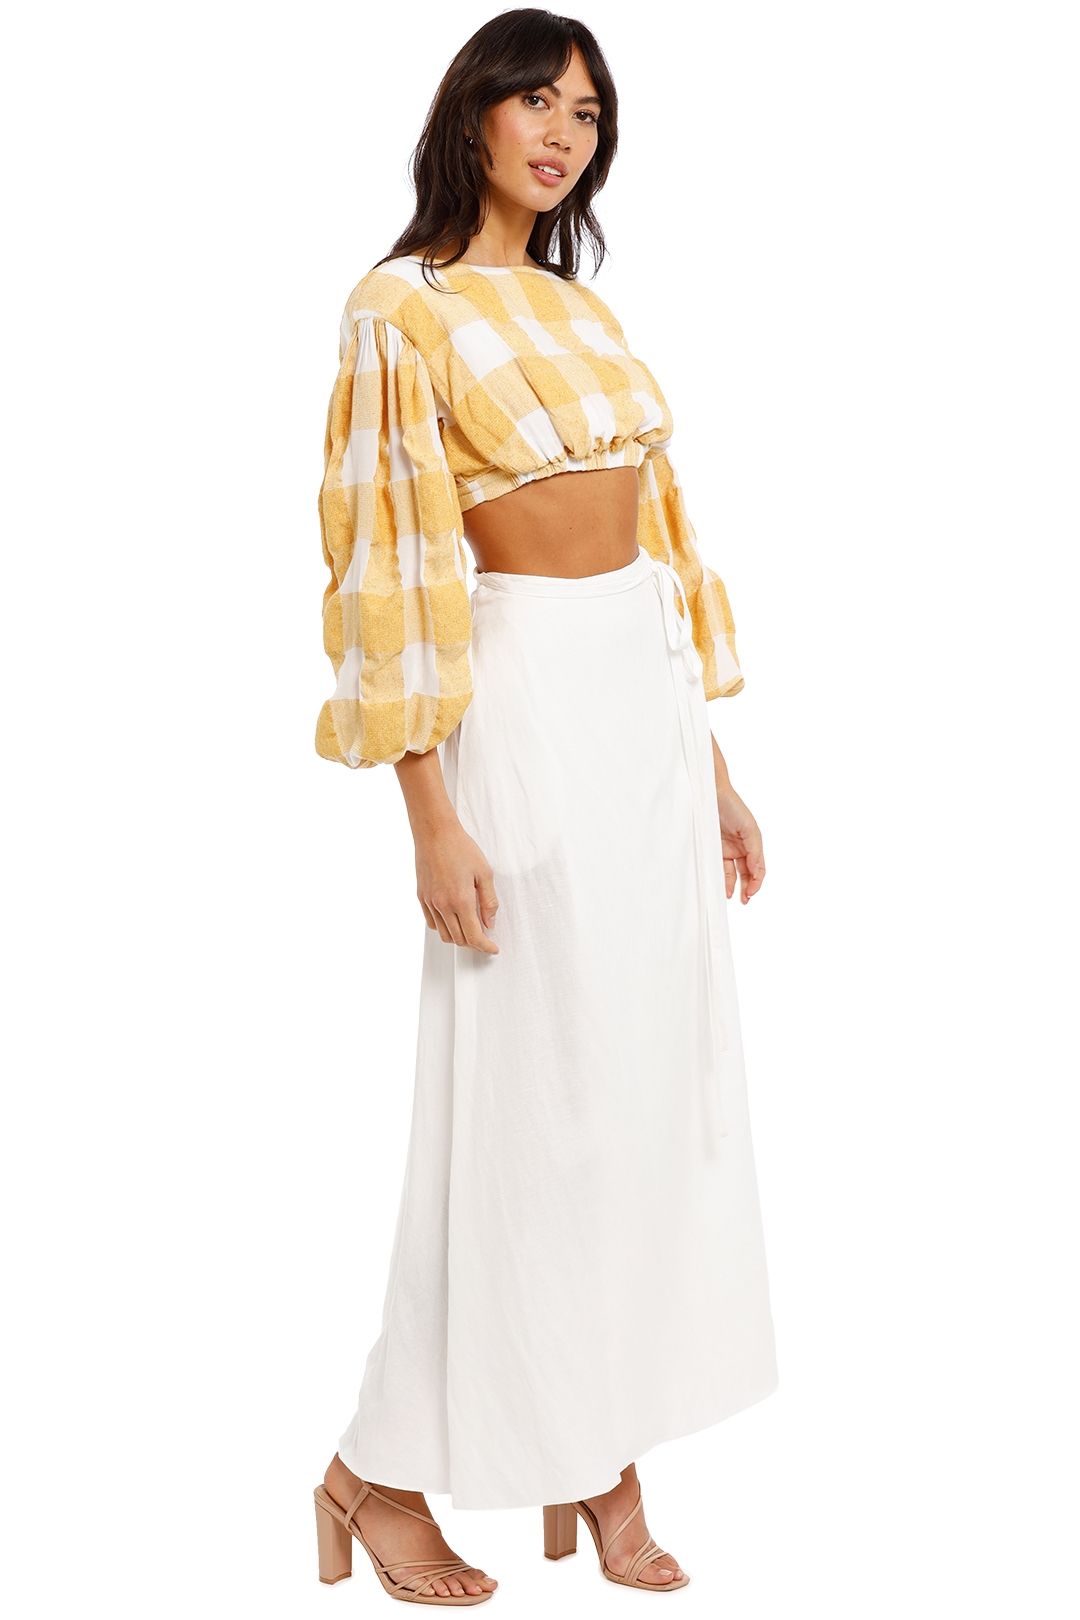 Camilla and Marc Marina Maxi Skirt in White Tie